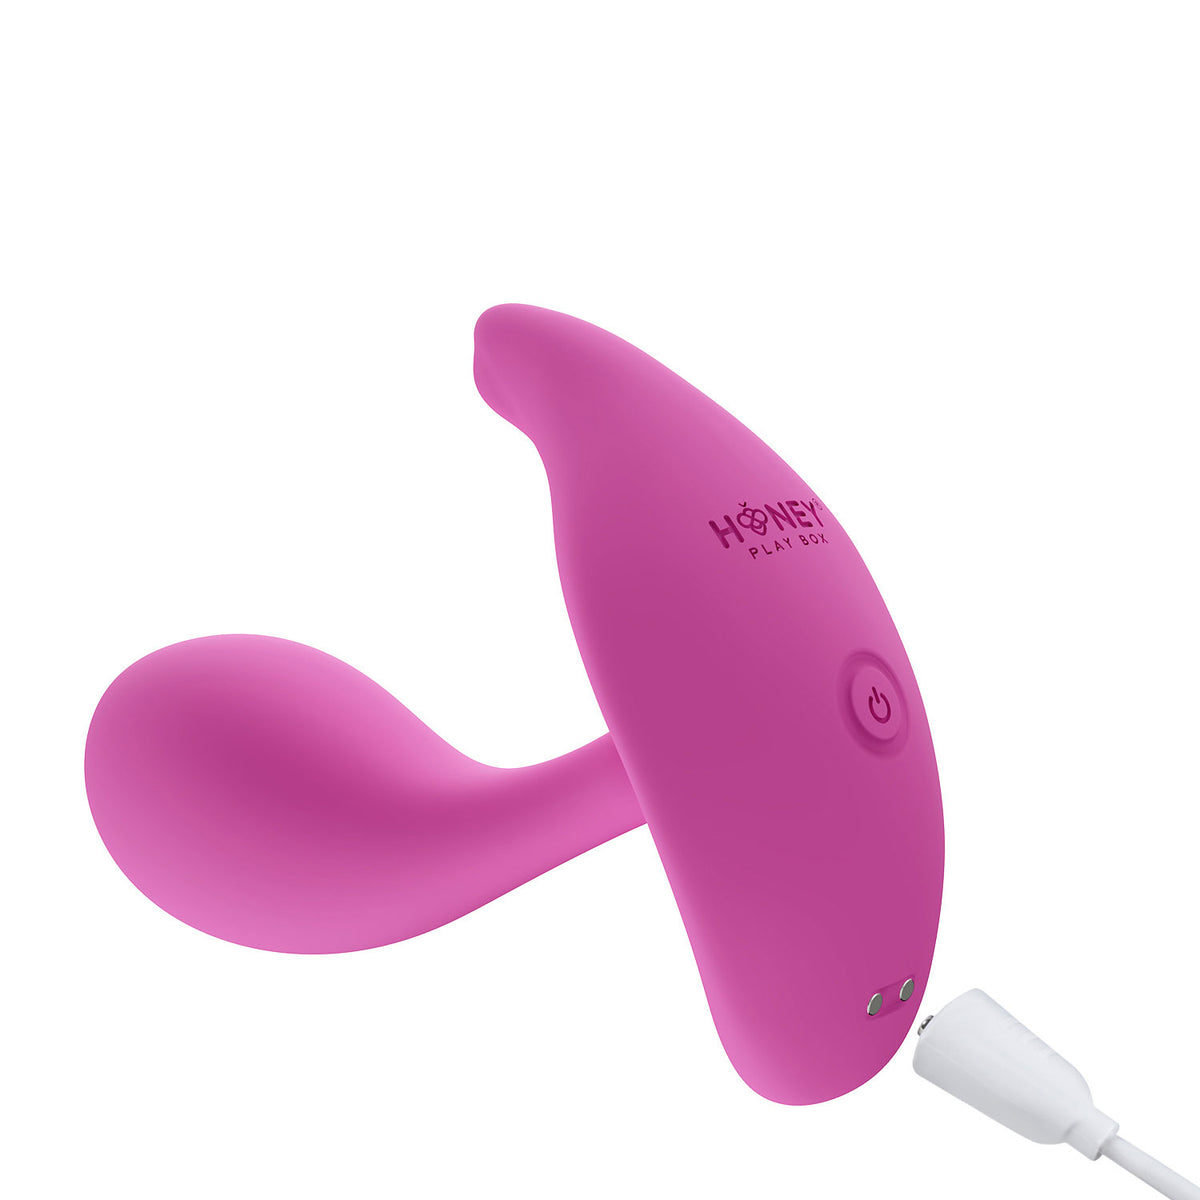 Oly 2 - App Enabled - Clit and G-Spot Vibrator -  Pink